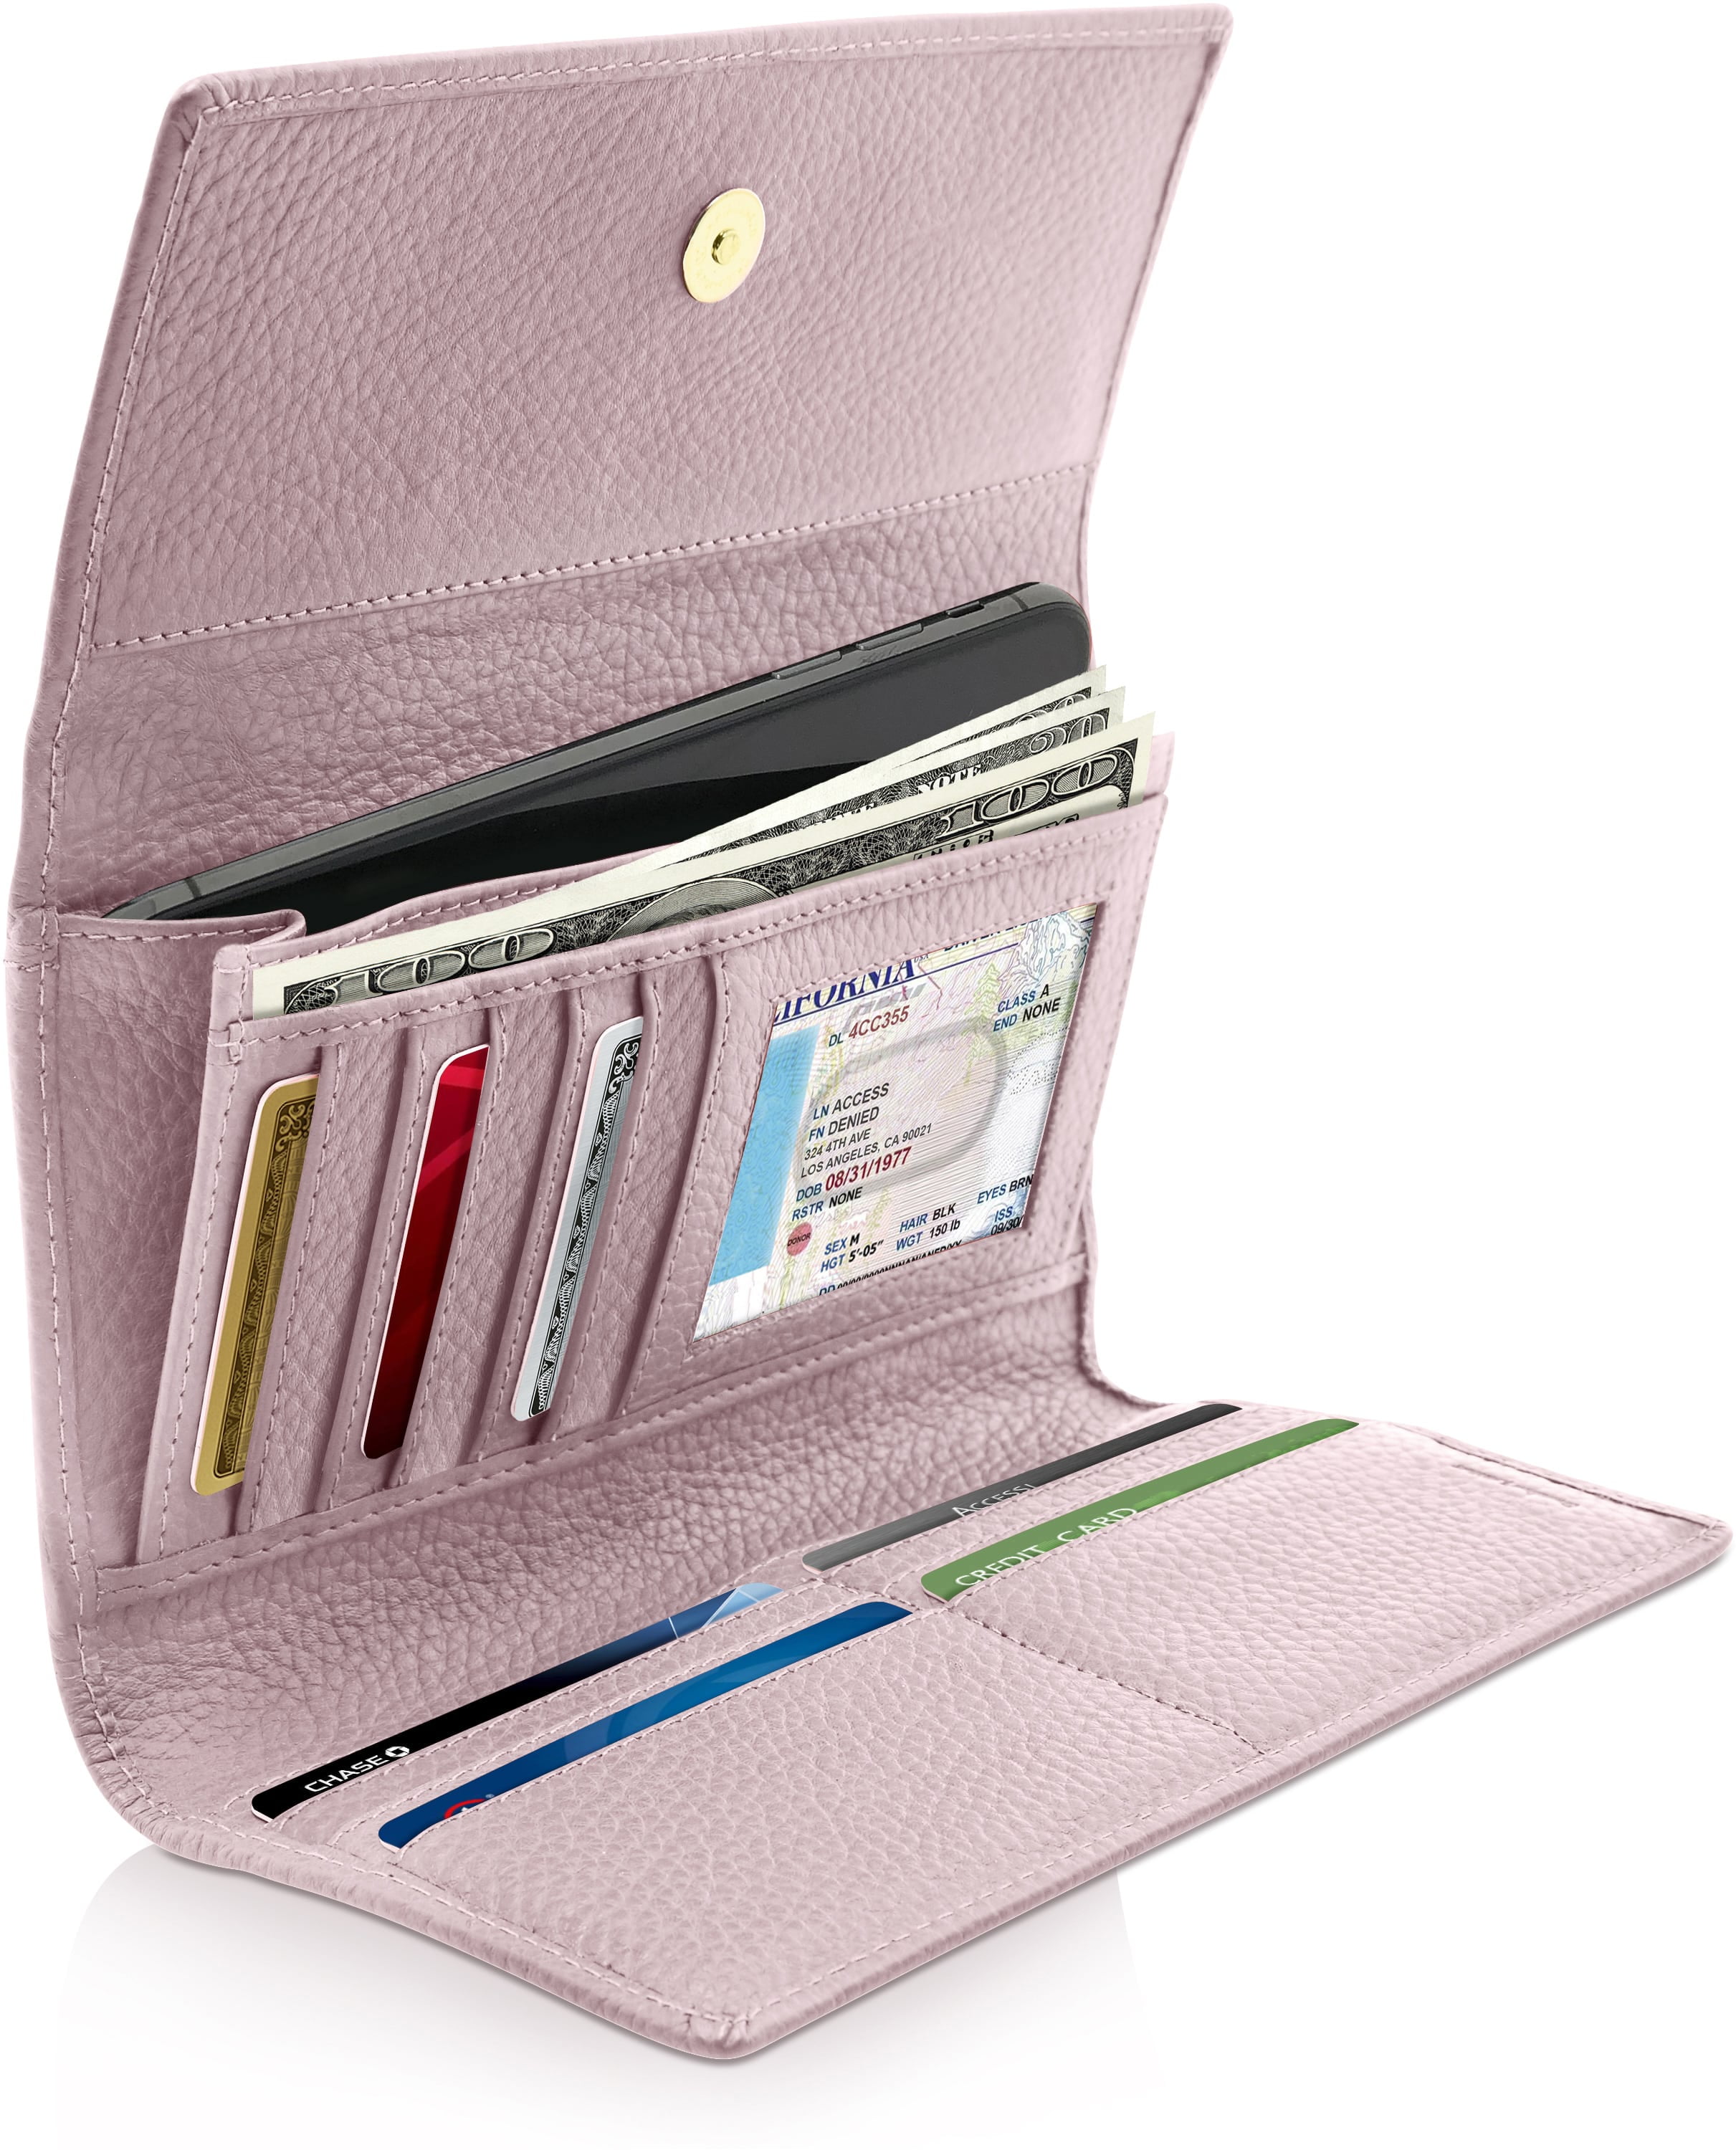 Trifold Clutch RFID Wallets For Women - Large Womens Wallet With Coin Pouch  Leather Organizer With Removable Checkbook Cover Gifts For Women